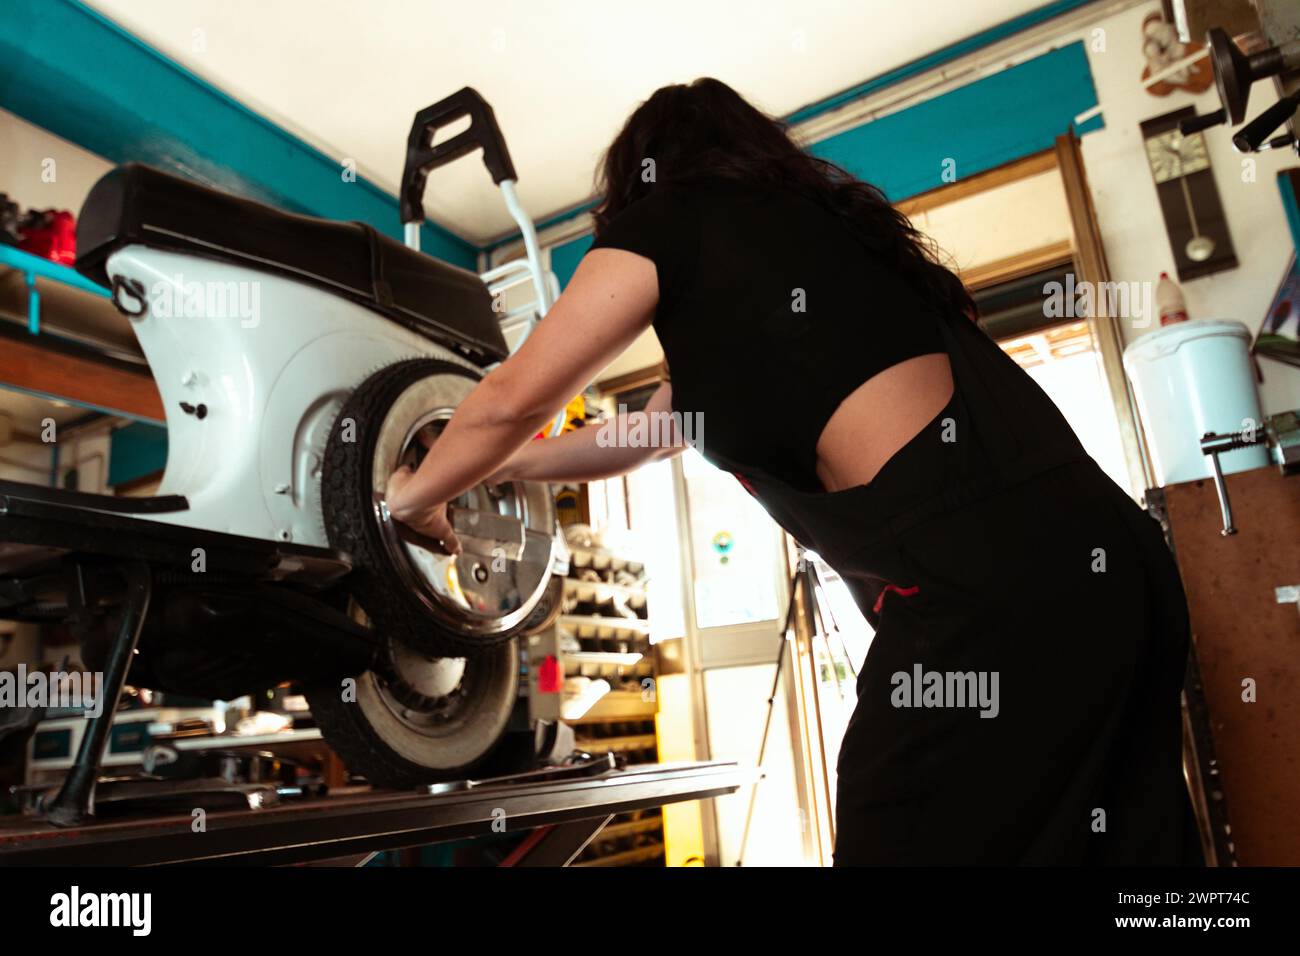 Concentrated woman mechanic working on installing a tire onto a classic italian scooter, latino female in traditional masculine jobs concept Stock Photo